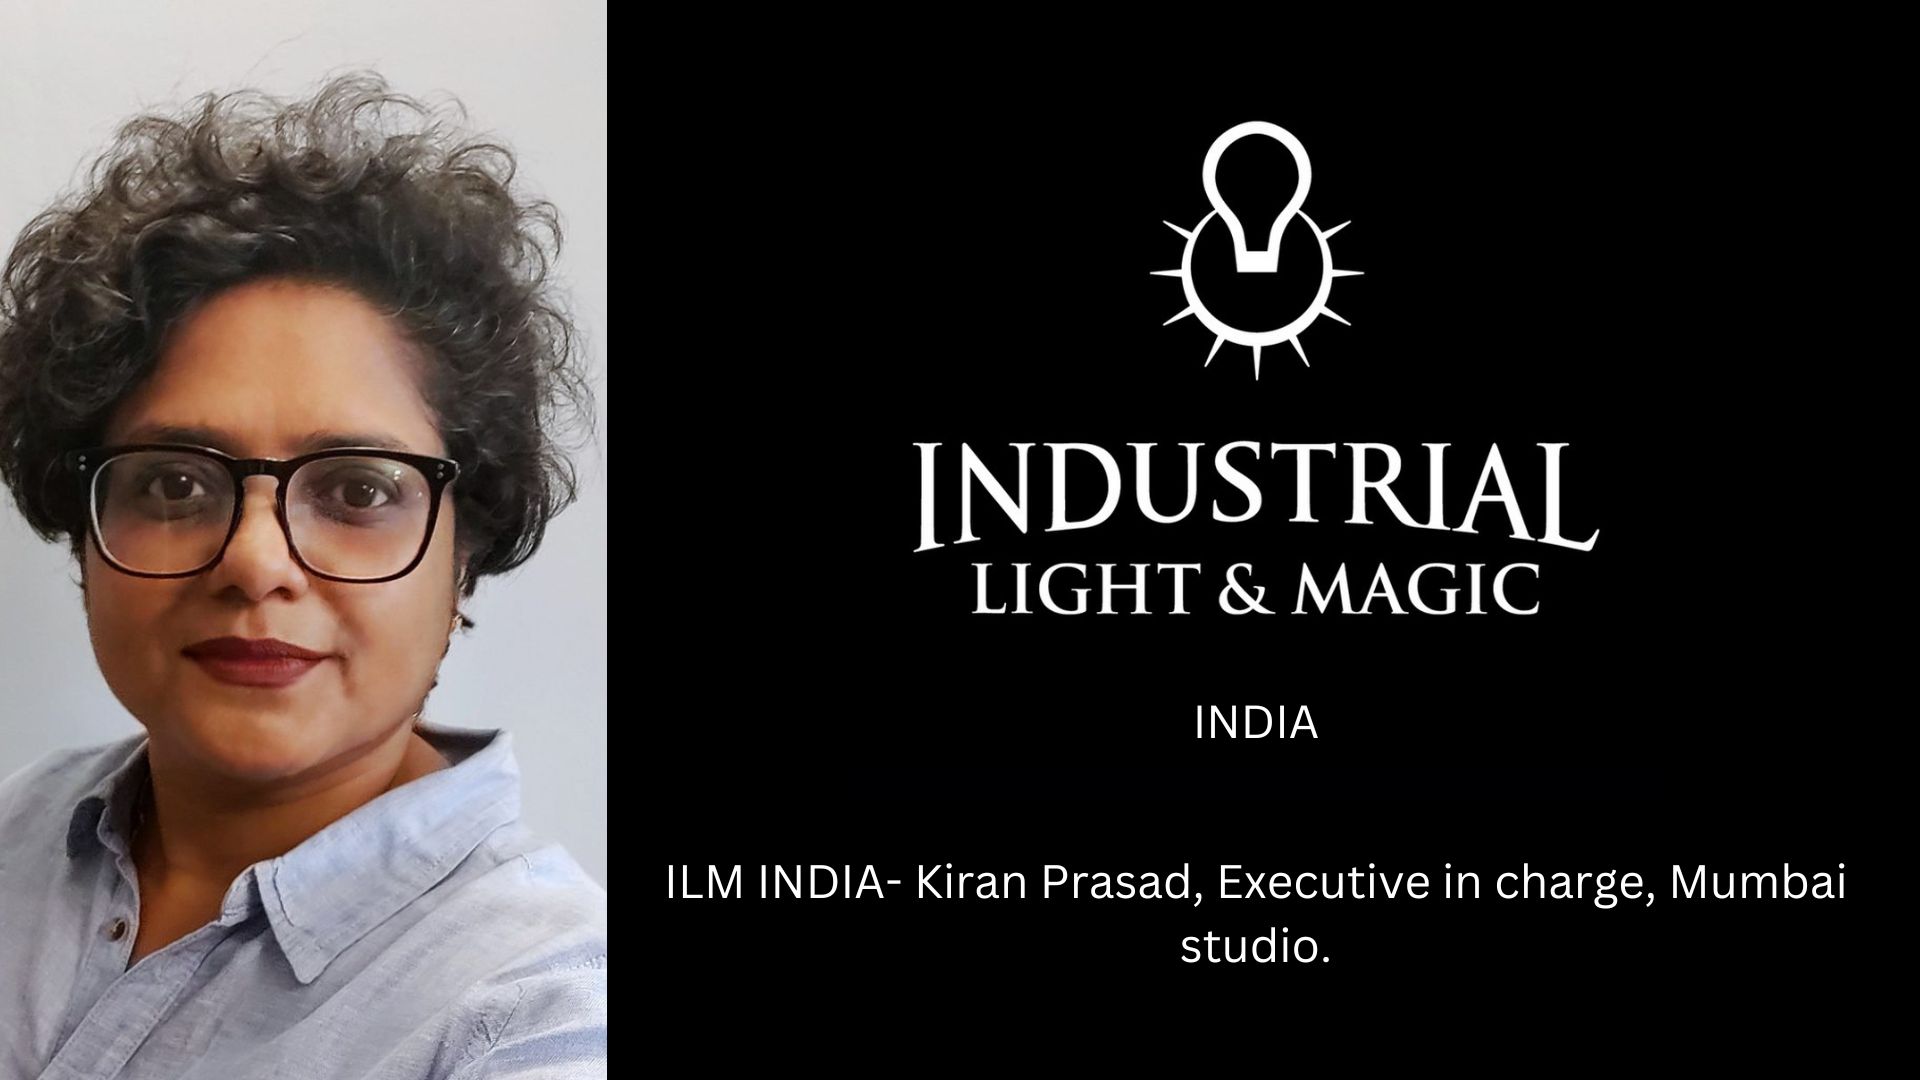 Industrial light & magic continues global expansion, opening a studio in India